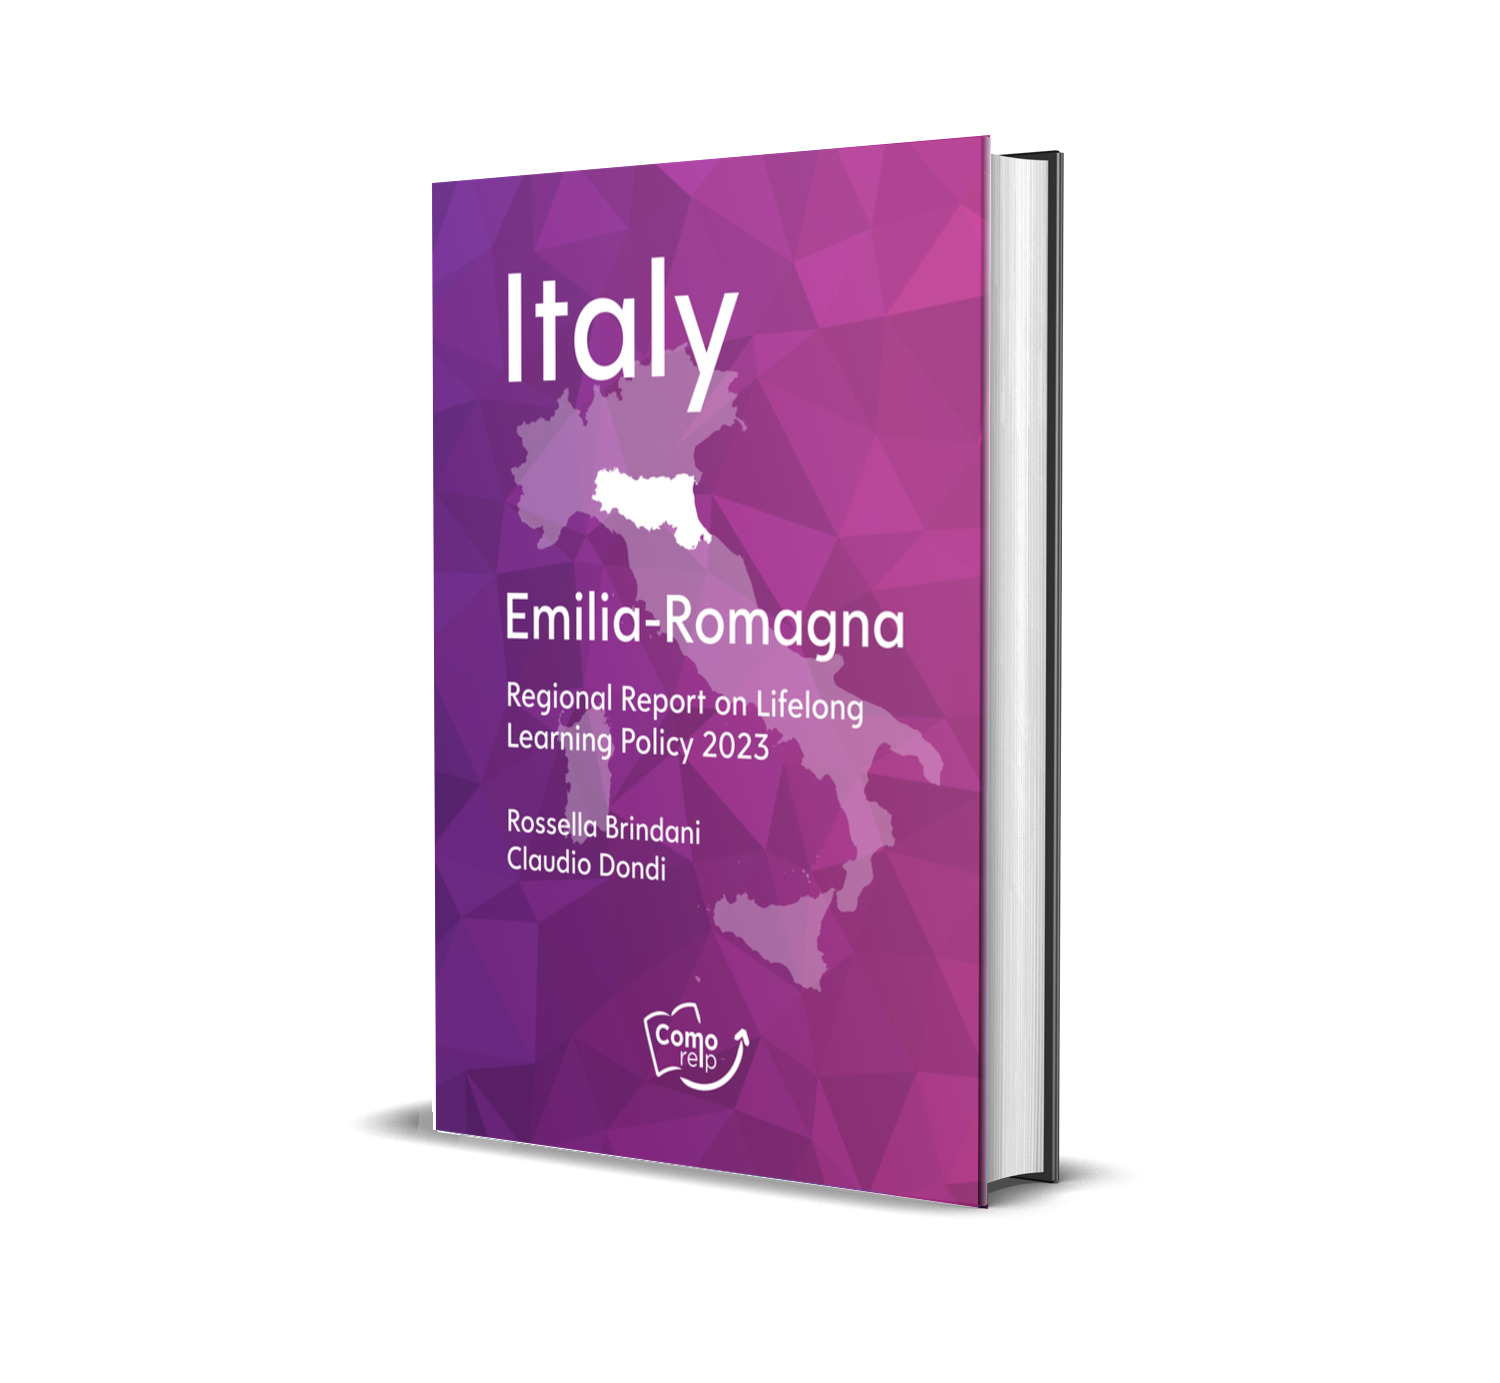 Lifelong Learning Policy in Emilia-Romagna